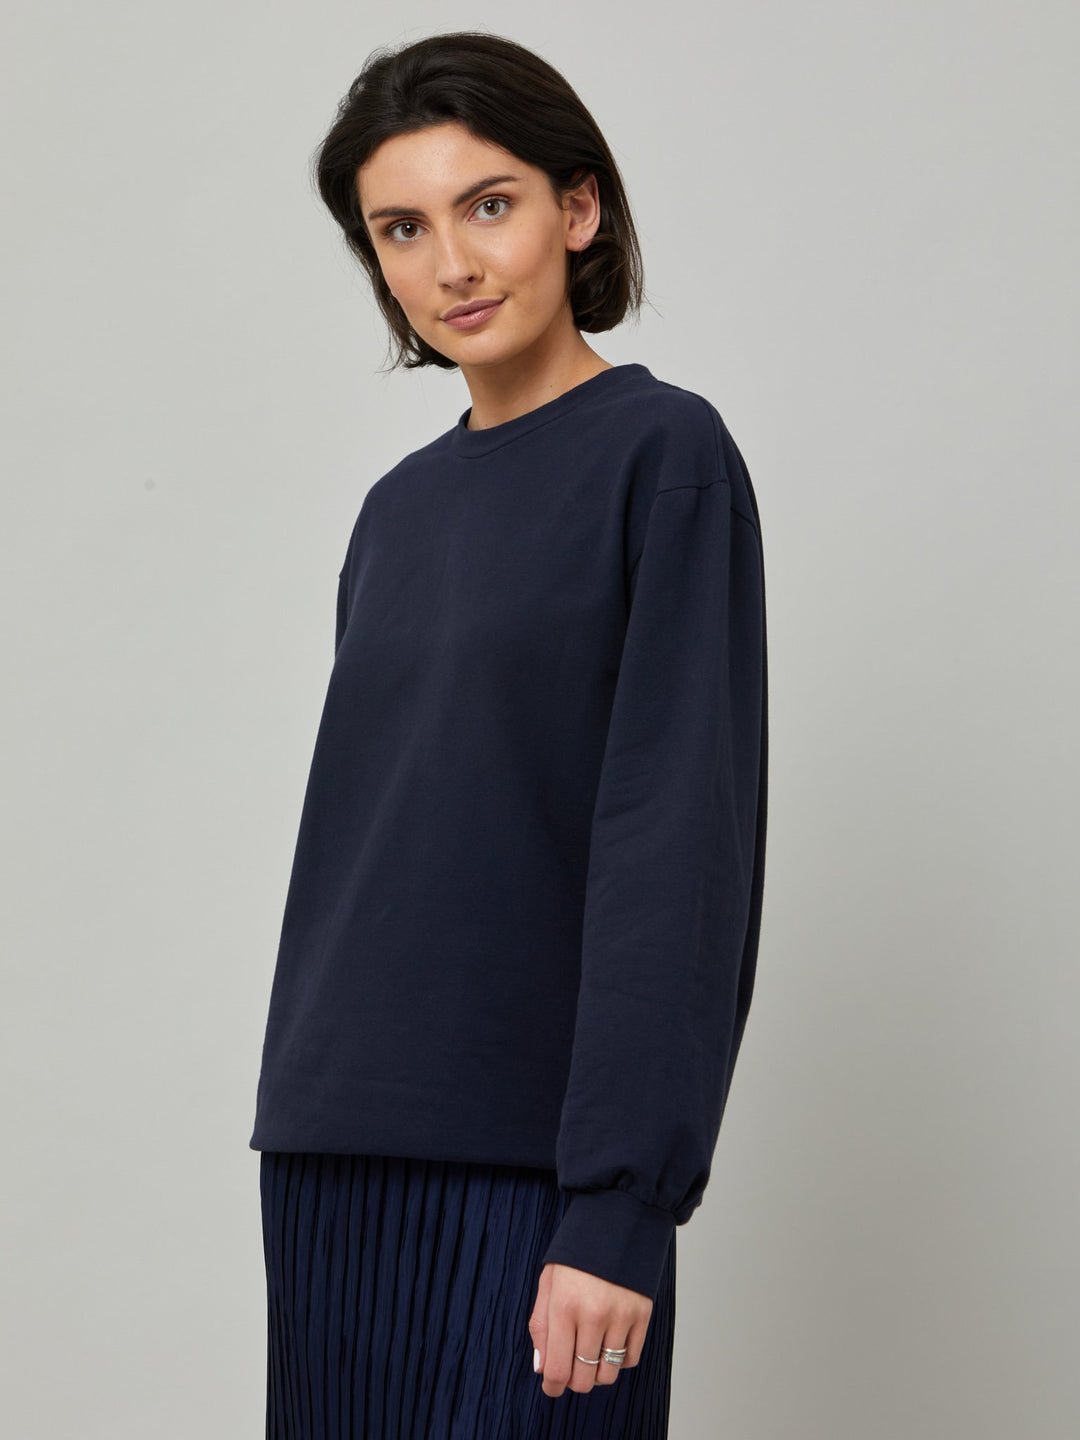 The Khloe indigo sweatshirt. A Jewel neck oversized jumper with full-length sleeves. Khloe takes you from everyday living to your yoga sessions. Crafted from a premium organic cotton jersey. Designed in Ireland by Helen McAlinden. Made in Europe. Free shipping to the EU & UK.